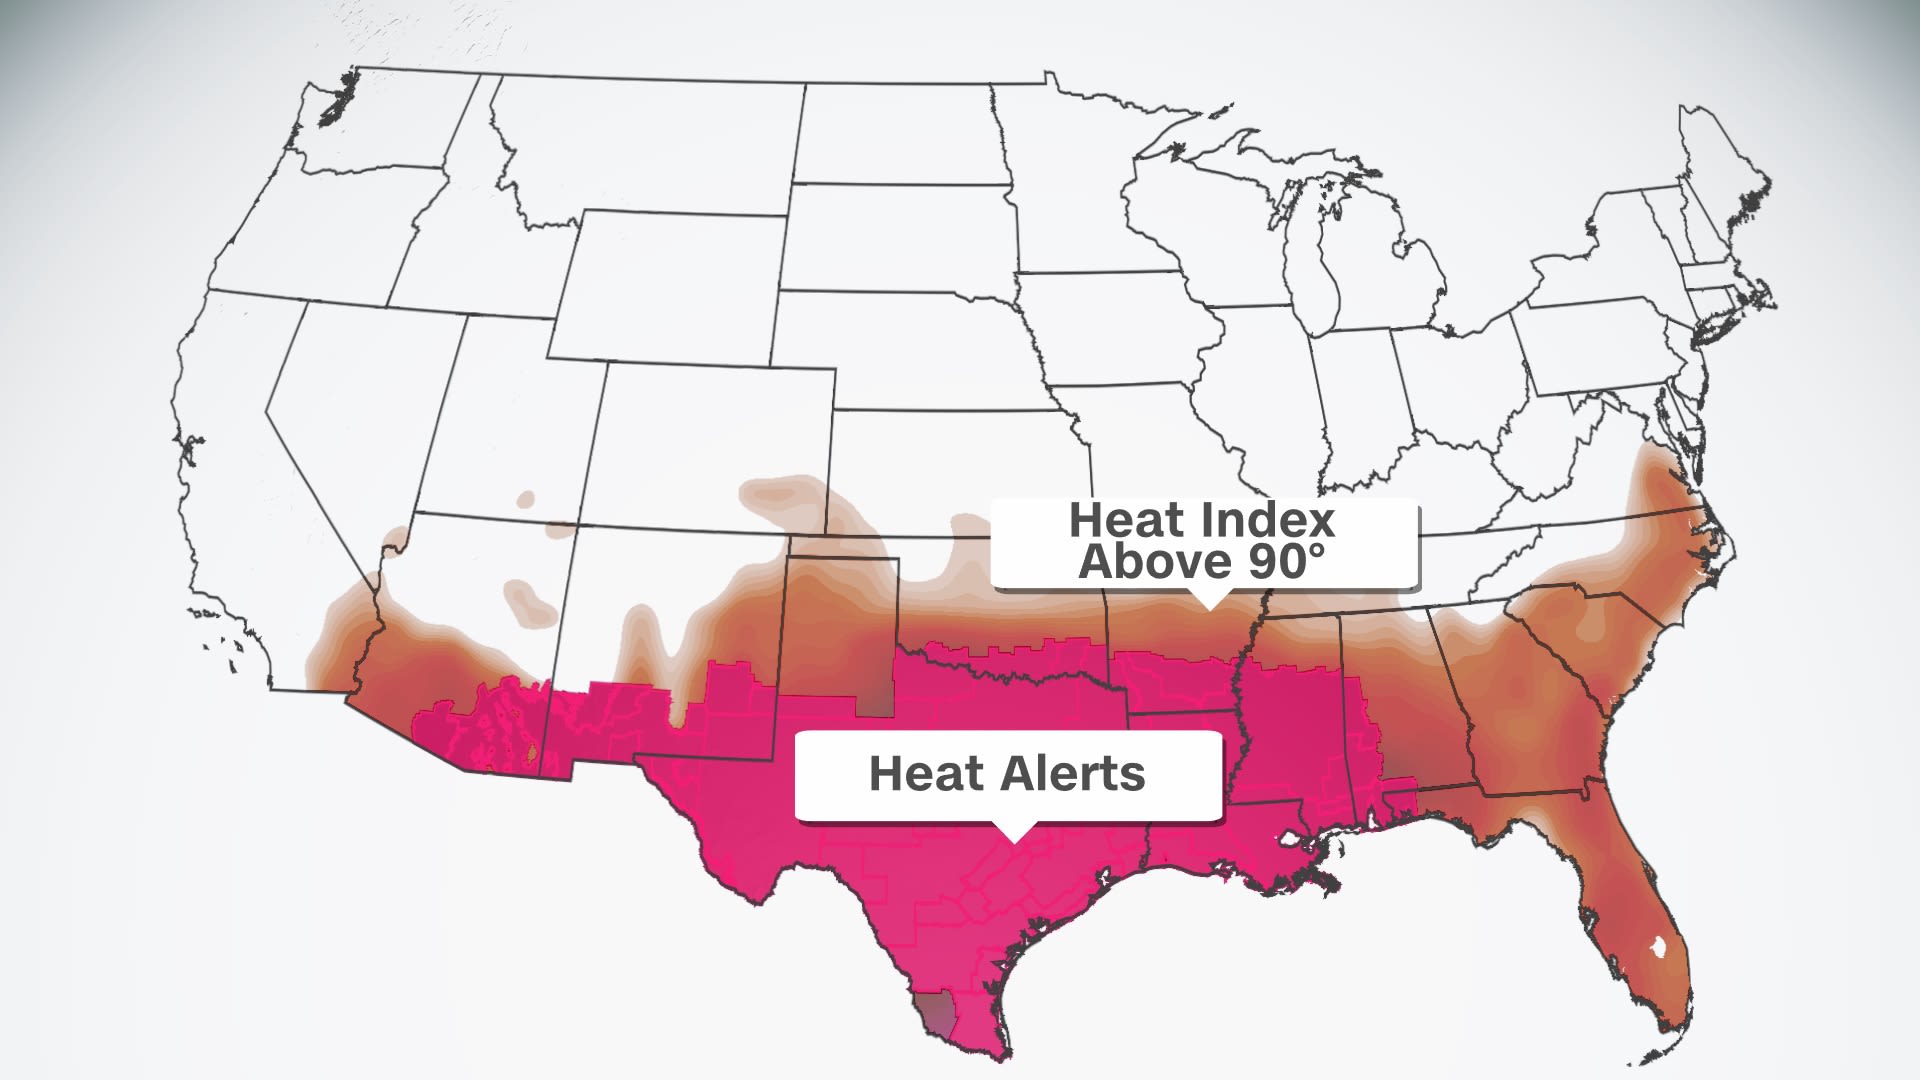 Unbearable Heat Alert Why Leaving Pets and Kids in Cars Can Be Deadly in Texas Right Now